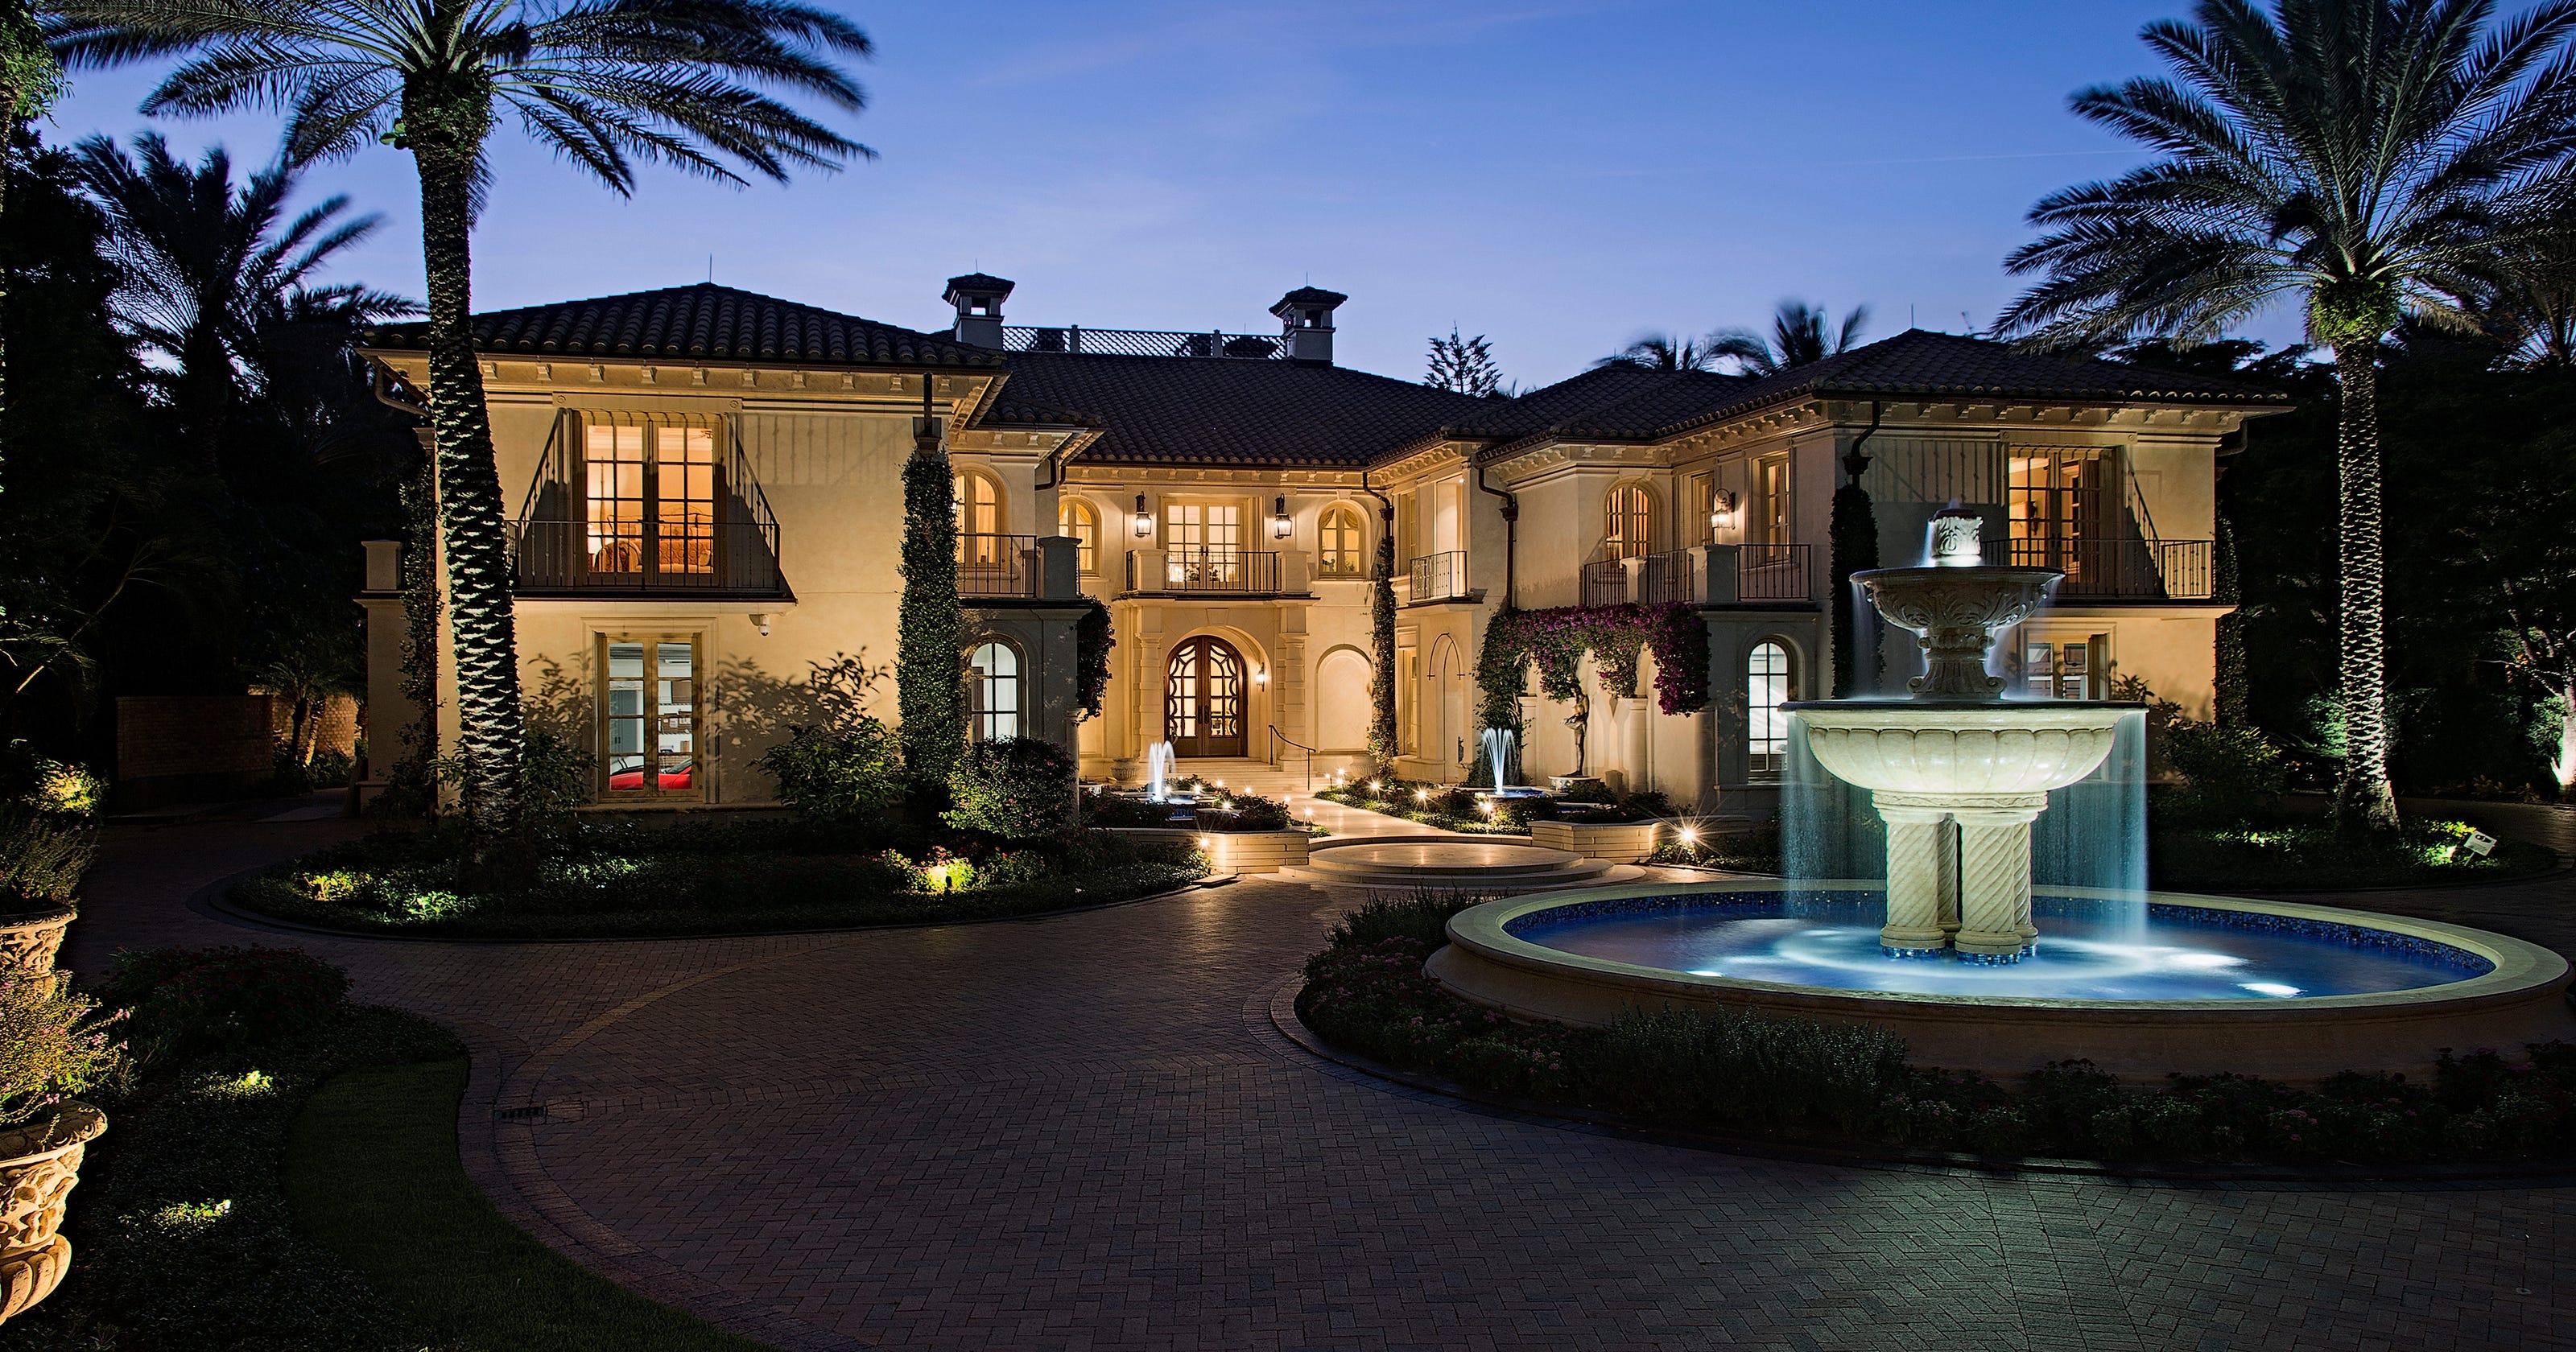 Two Gulf-front mansions in Naples among priciest homes for sale in Fla.